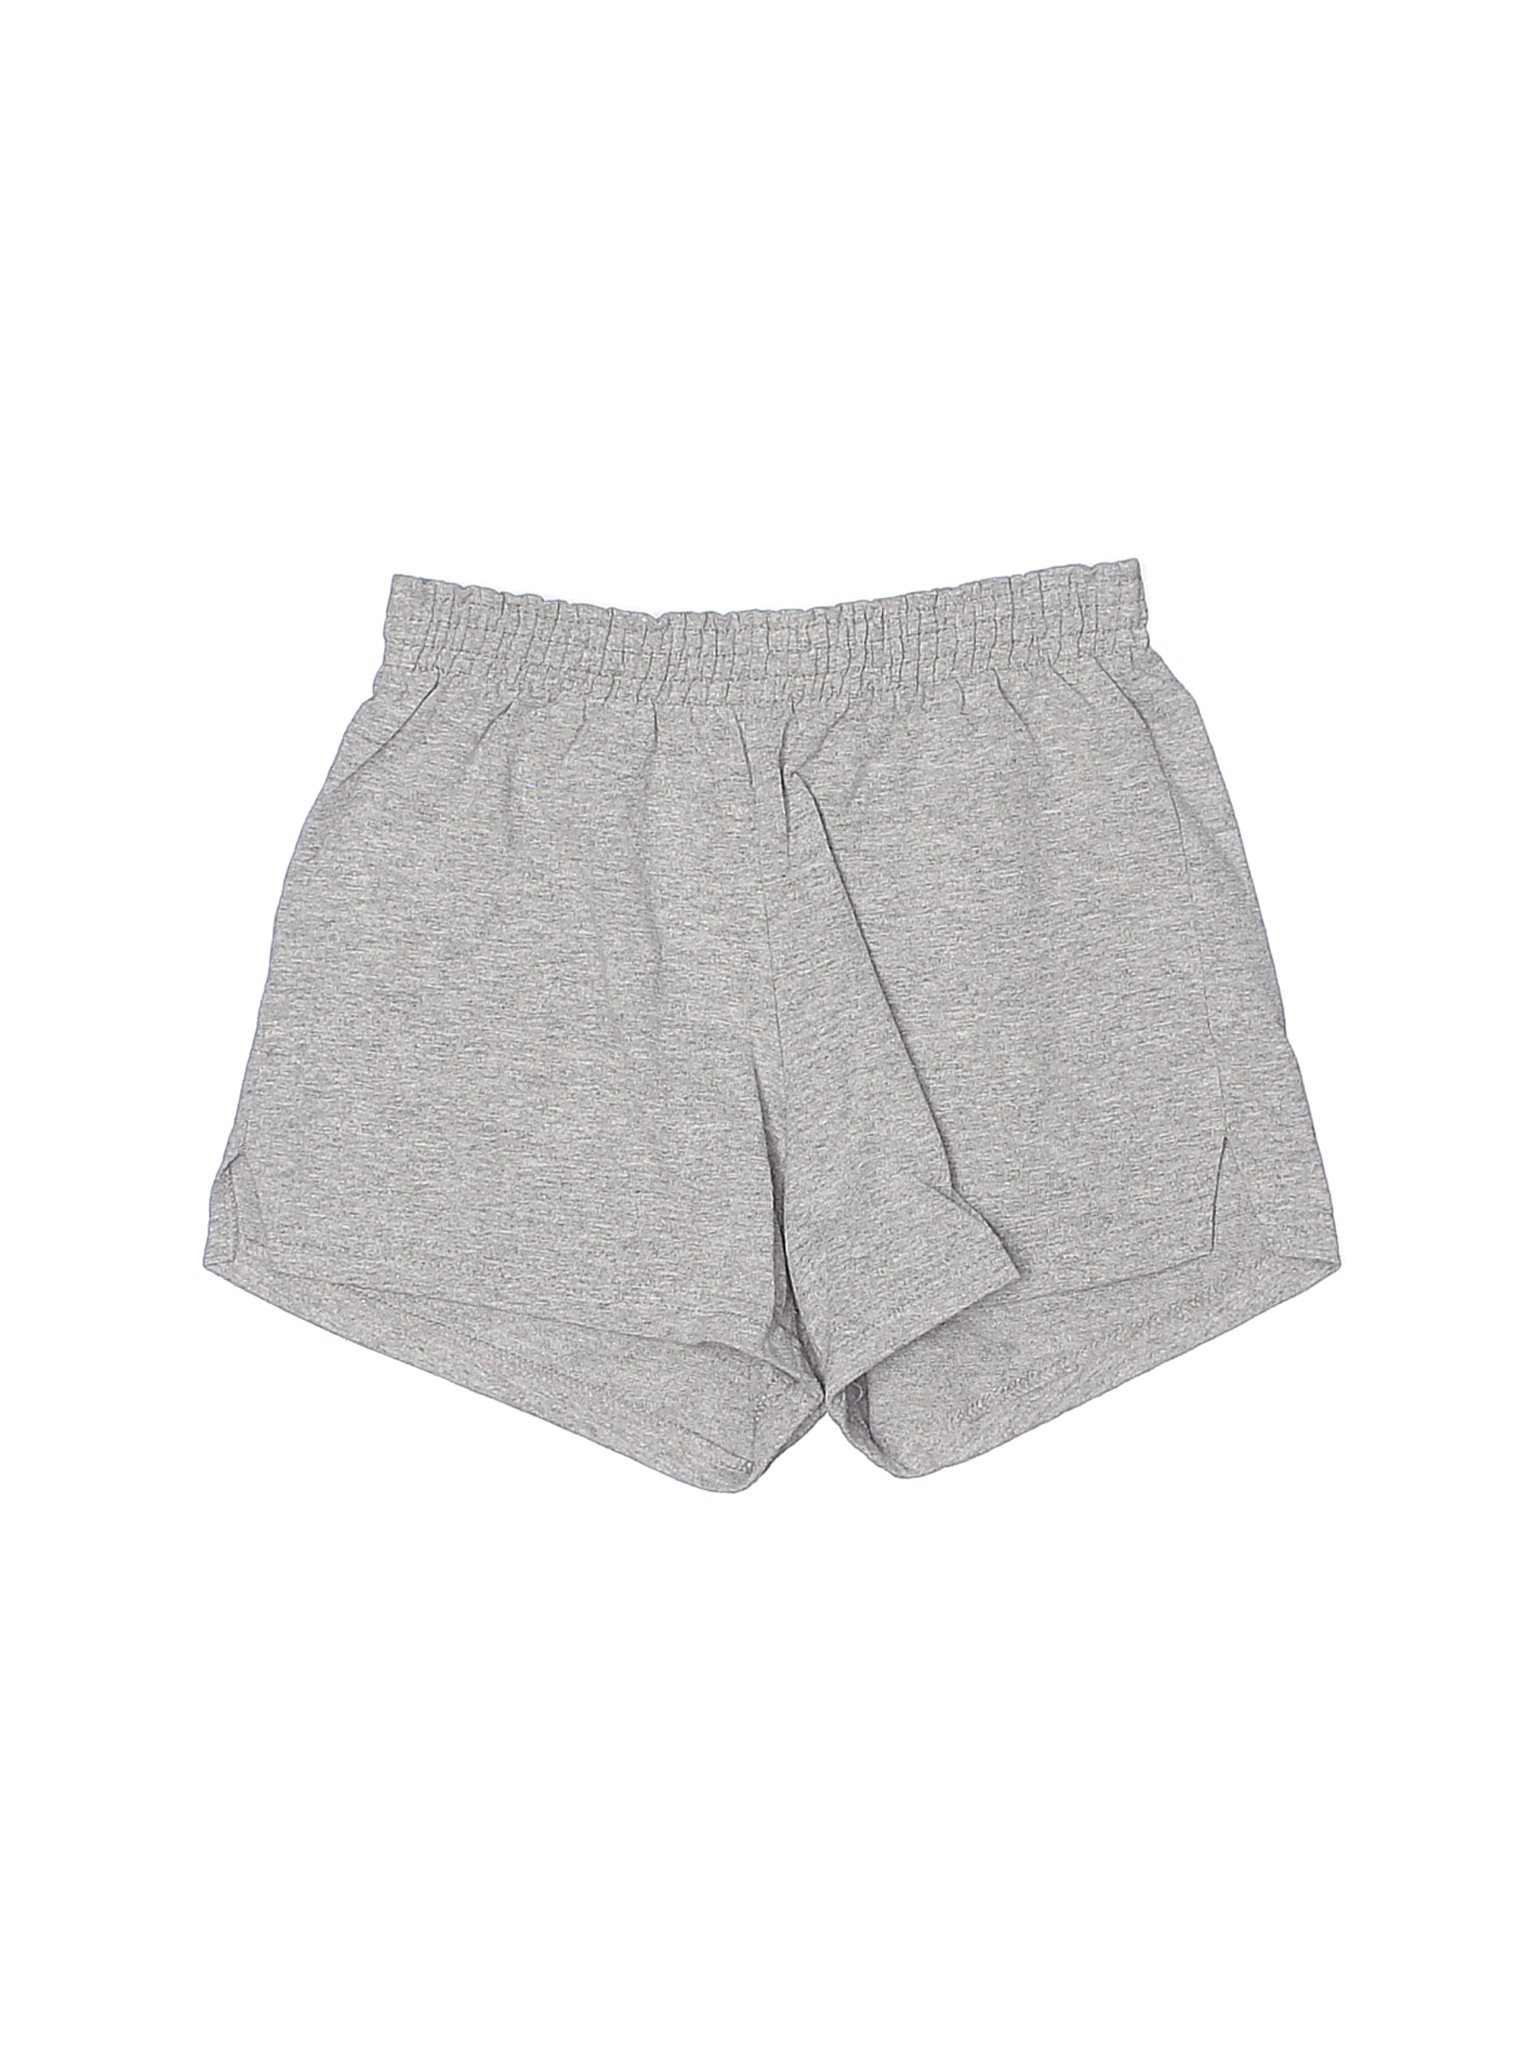 SOFFE Women's Casual Shorts On Sale Up To 90% Off Retail | thredUP